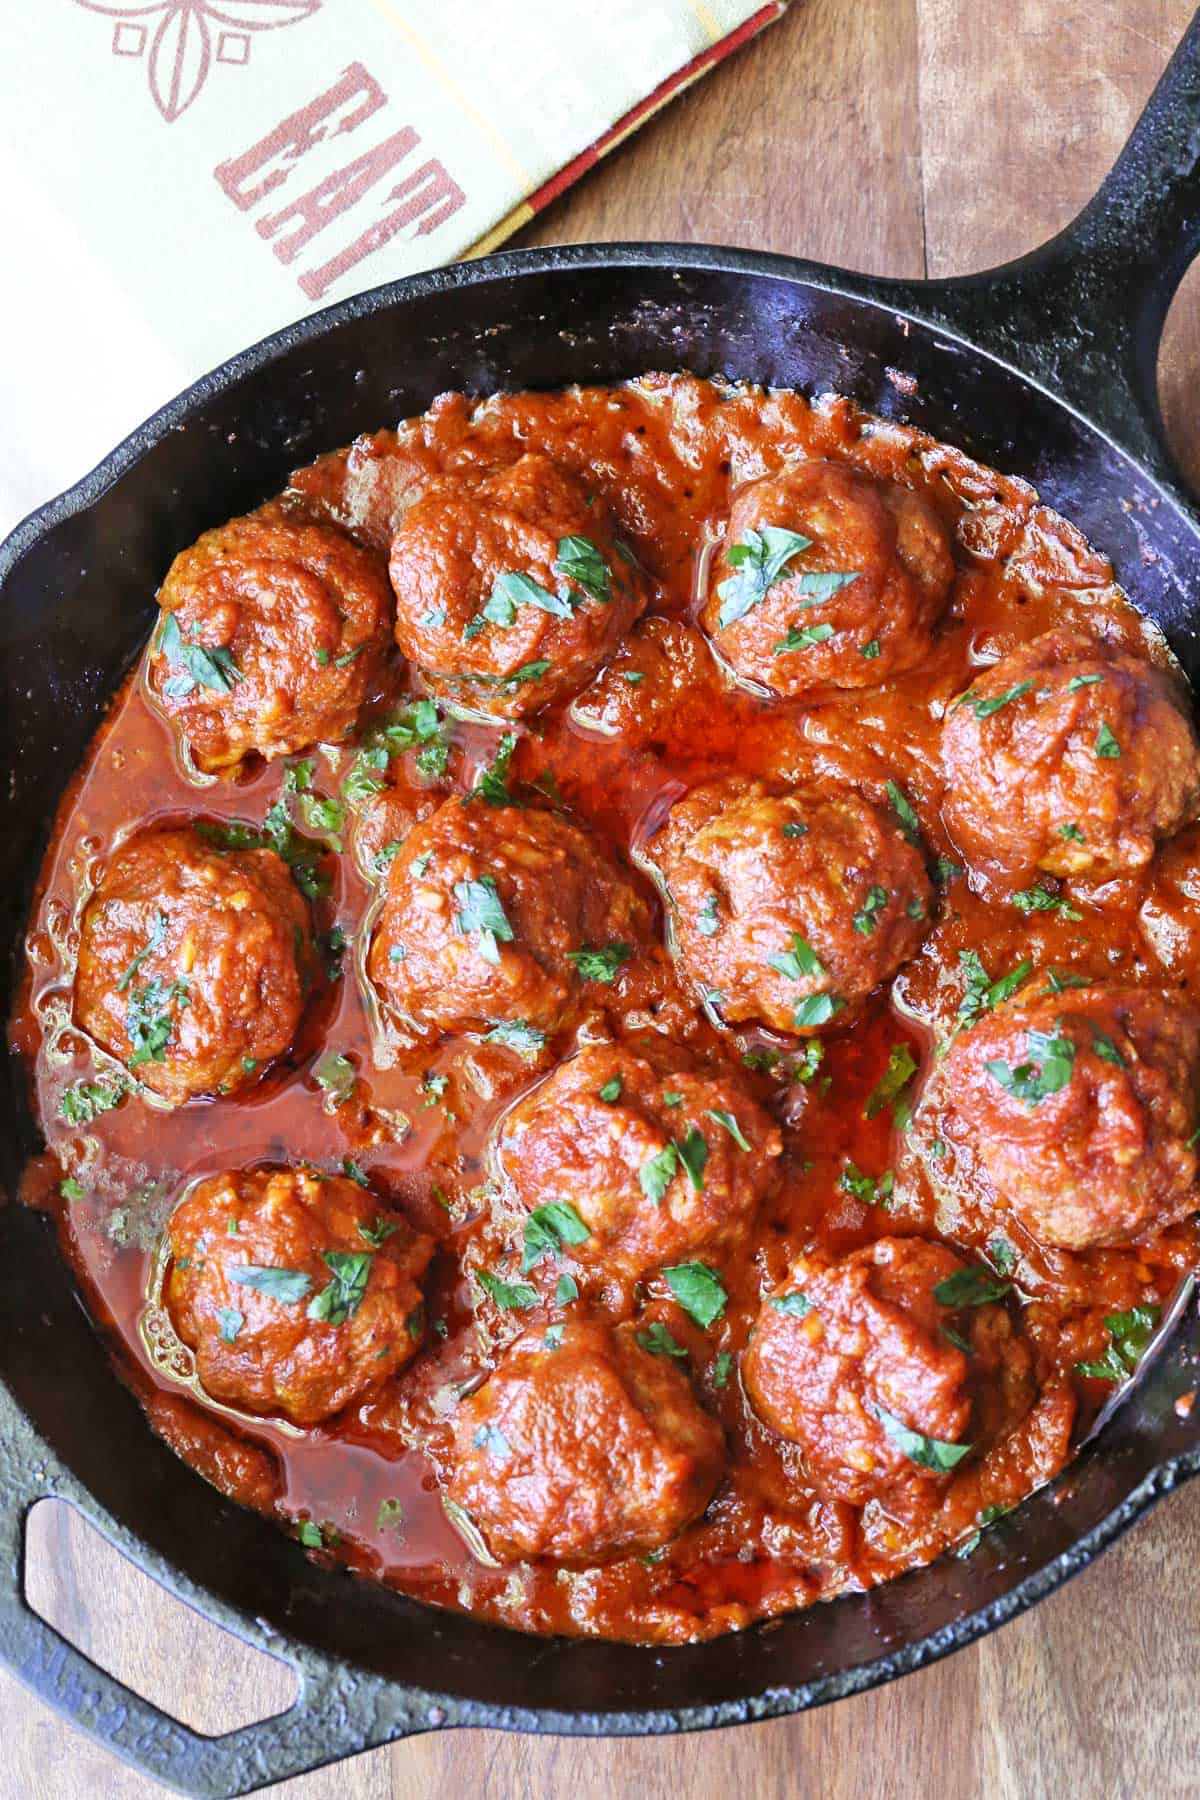 Meatballs in tomato sauce are served in a cast-iron skillet.